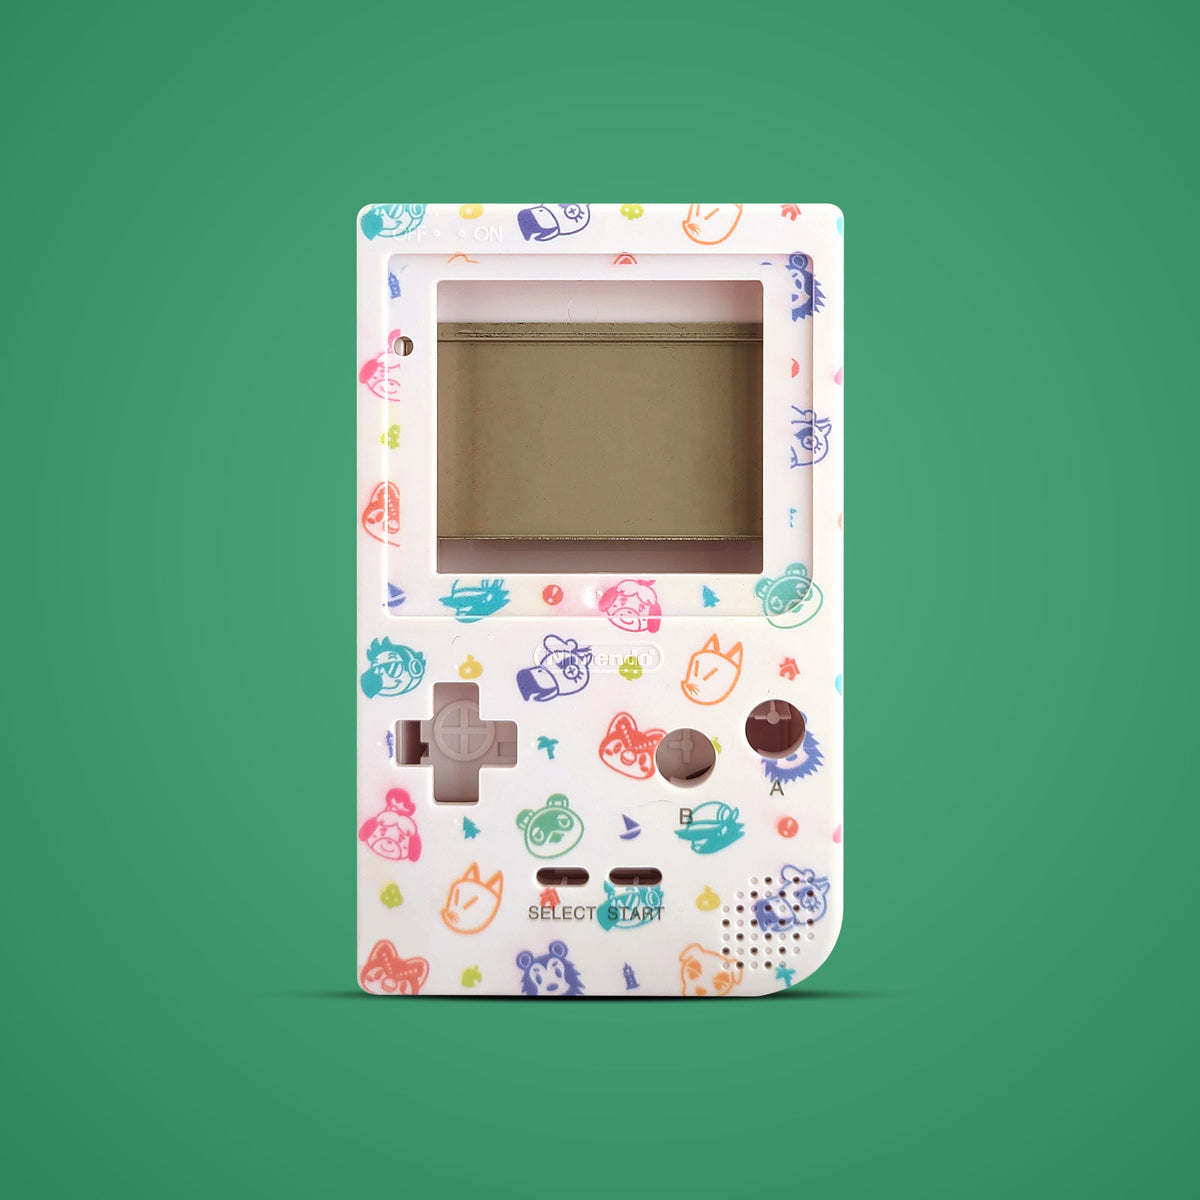 GitHub - MouseBiteLabs/Game-Boy-Pocket-Color: A Game Boy Pocket outfitted  with Game Boy Color support and other modern features